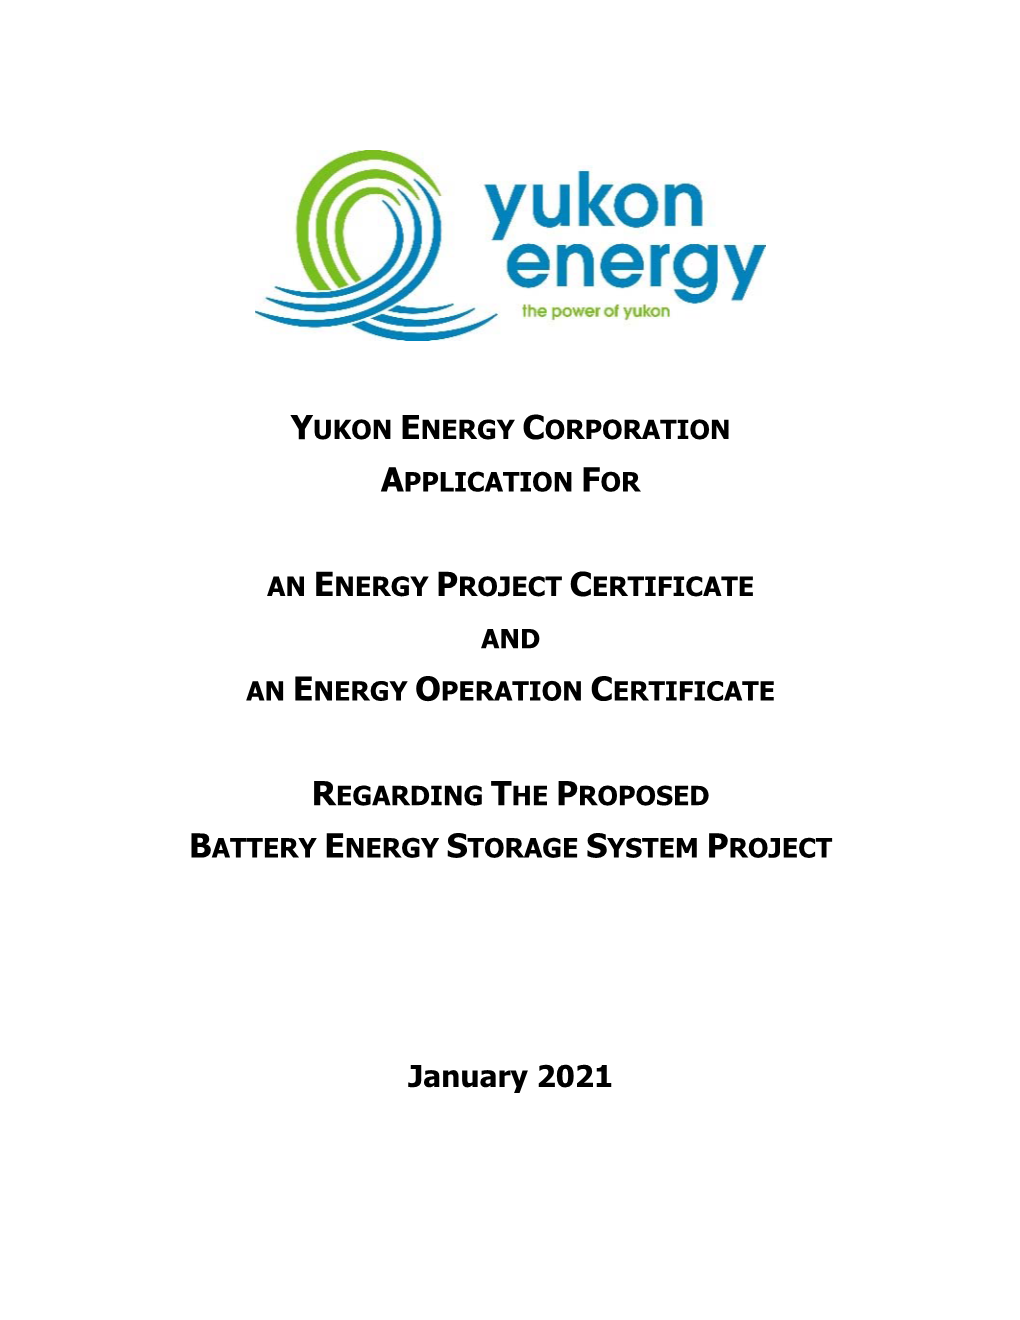 Application for Energy Project and Energy Operation Certificates, 2021